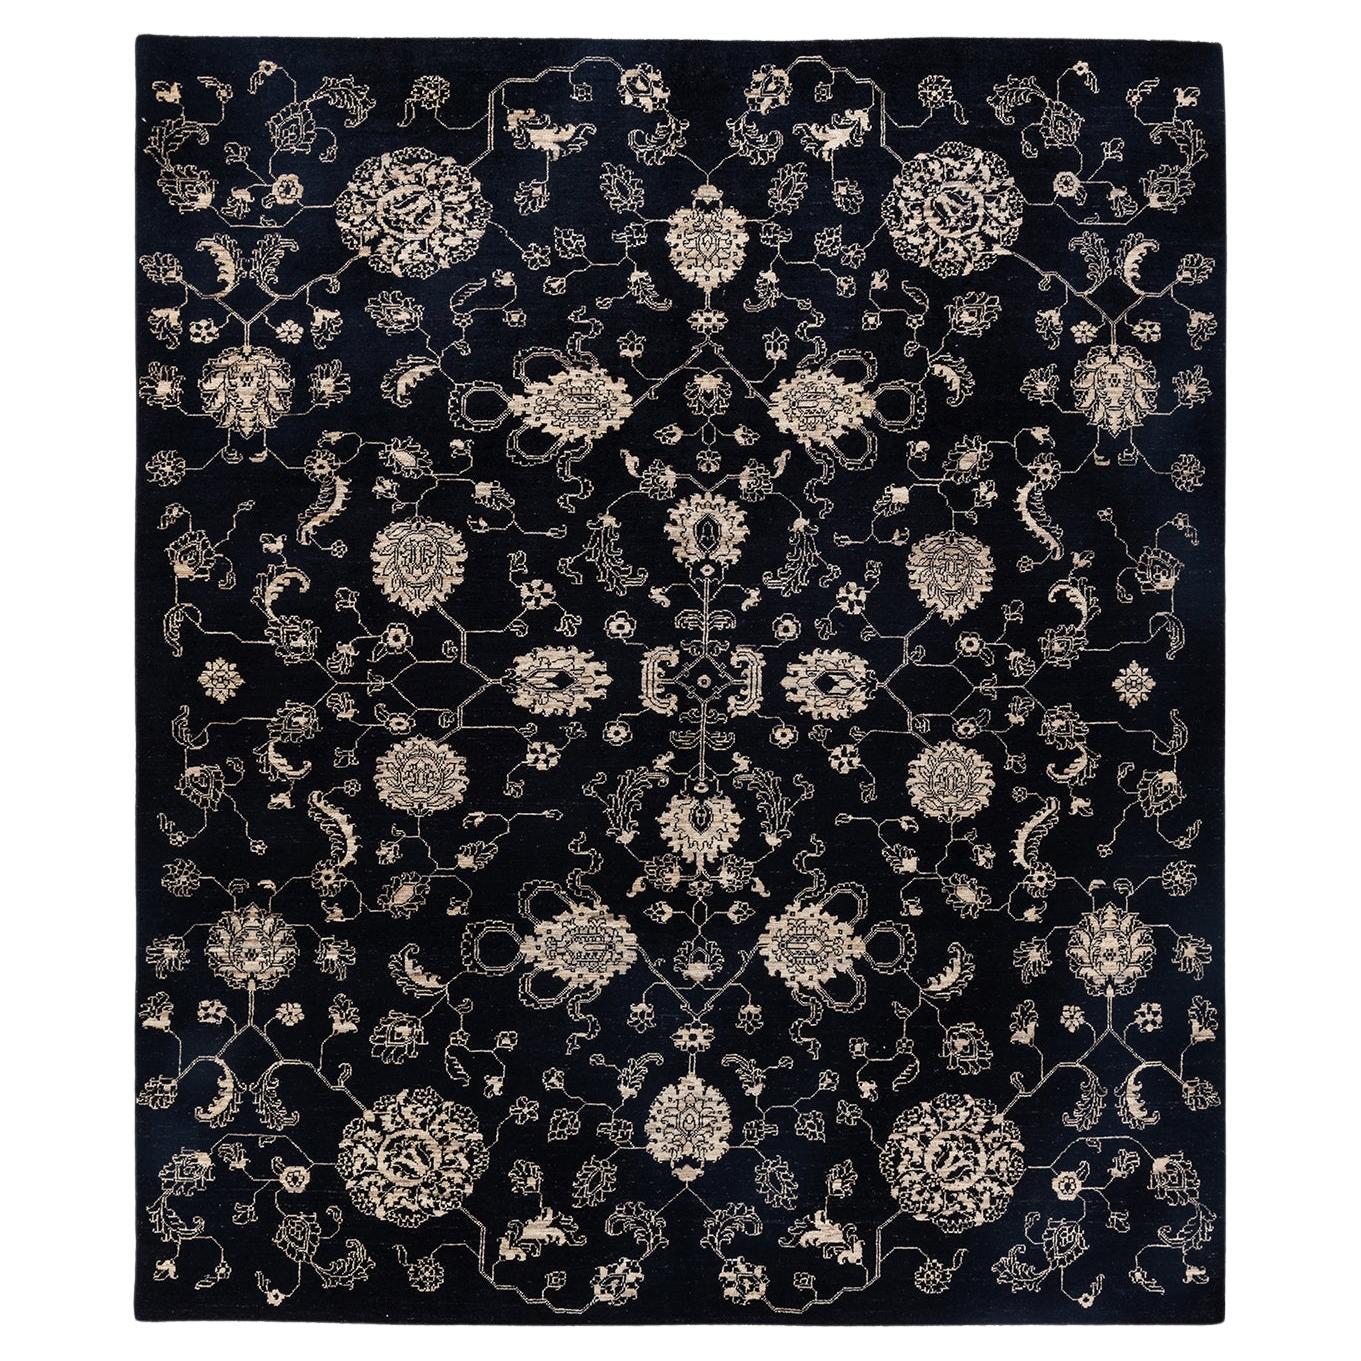 One-of-a-kind Hand Knotted Wool Eclectic Black Area Rug